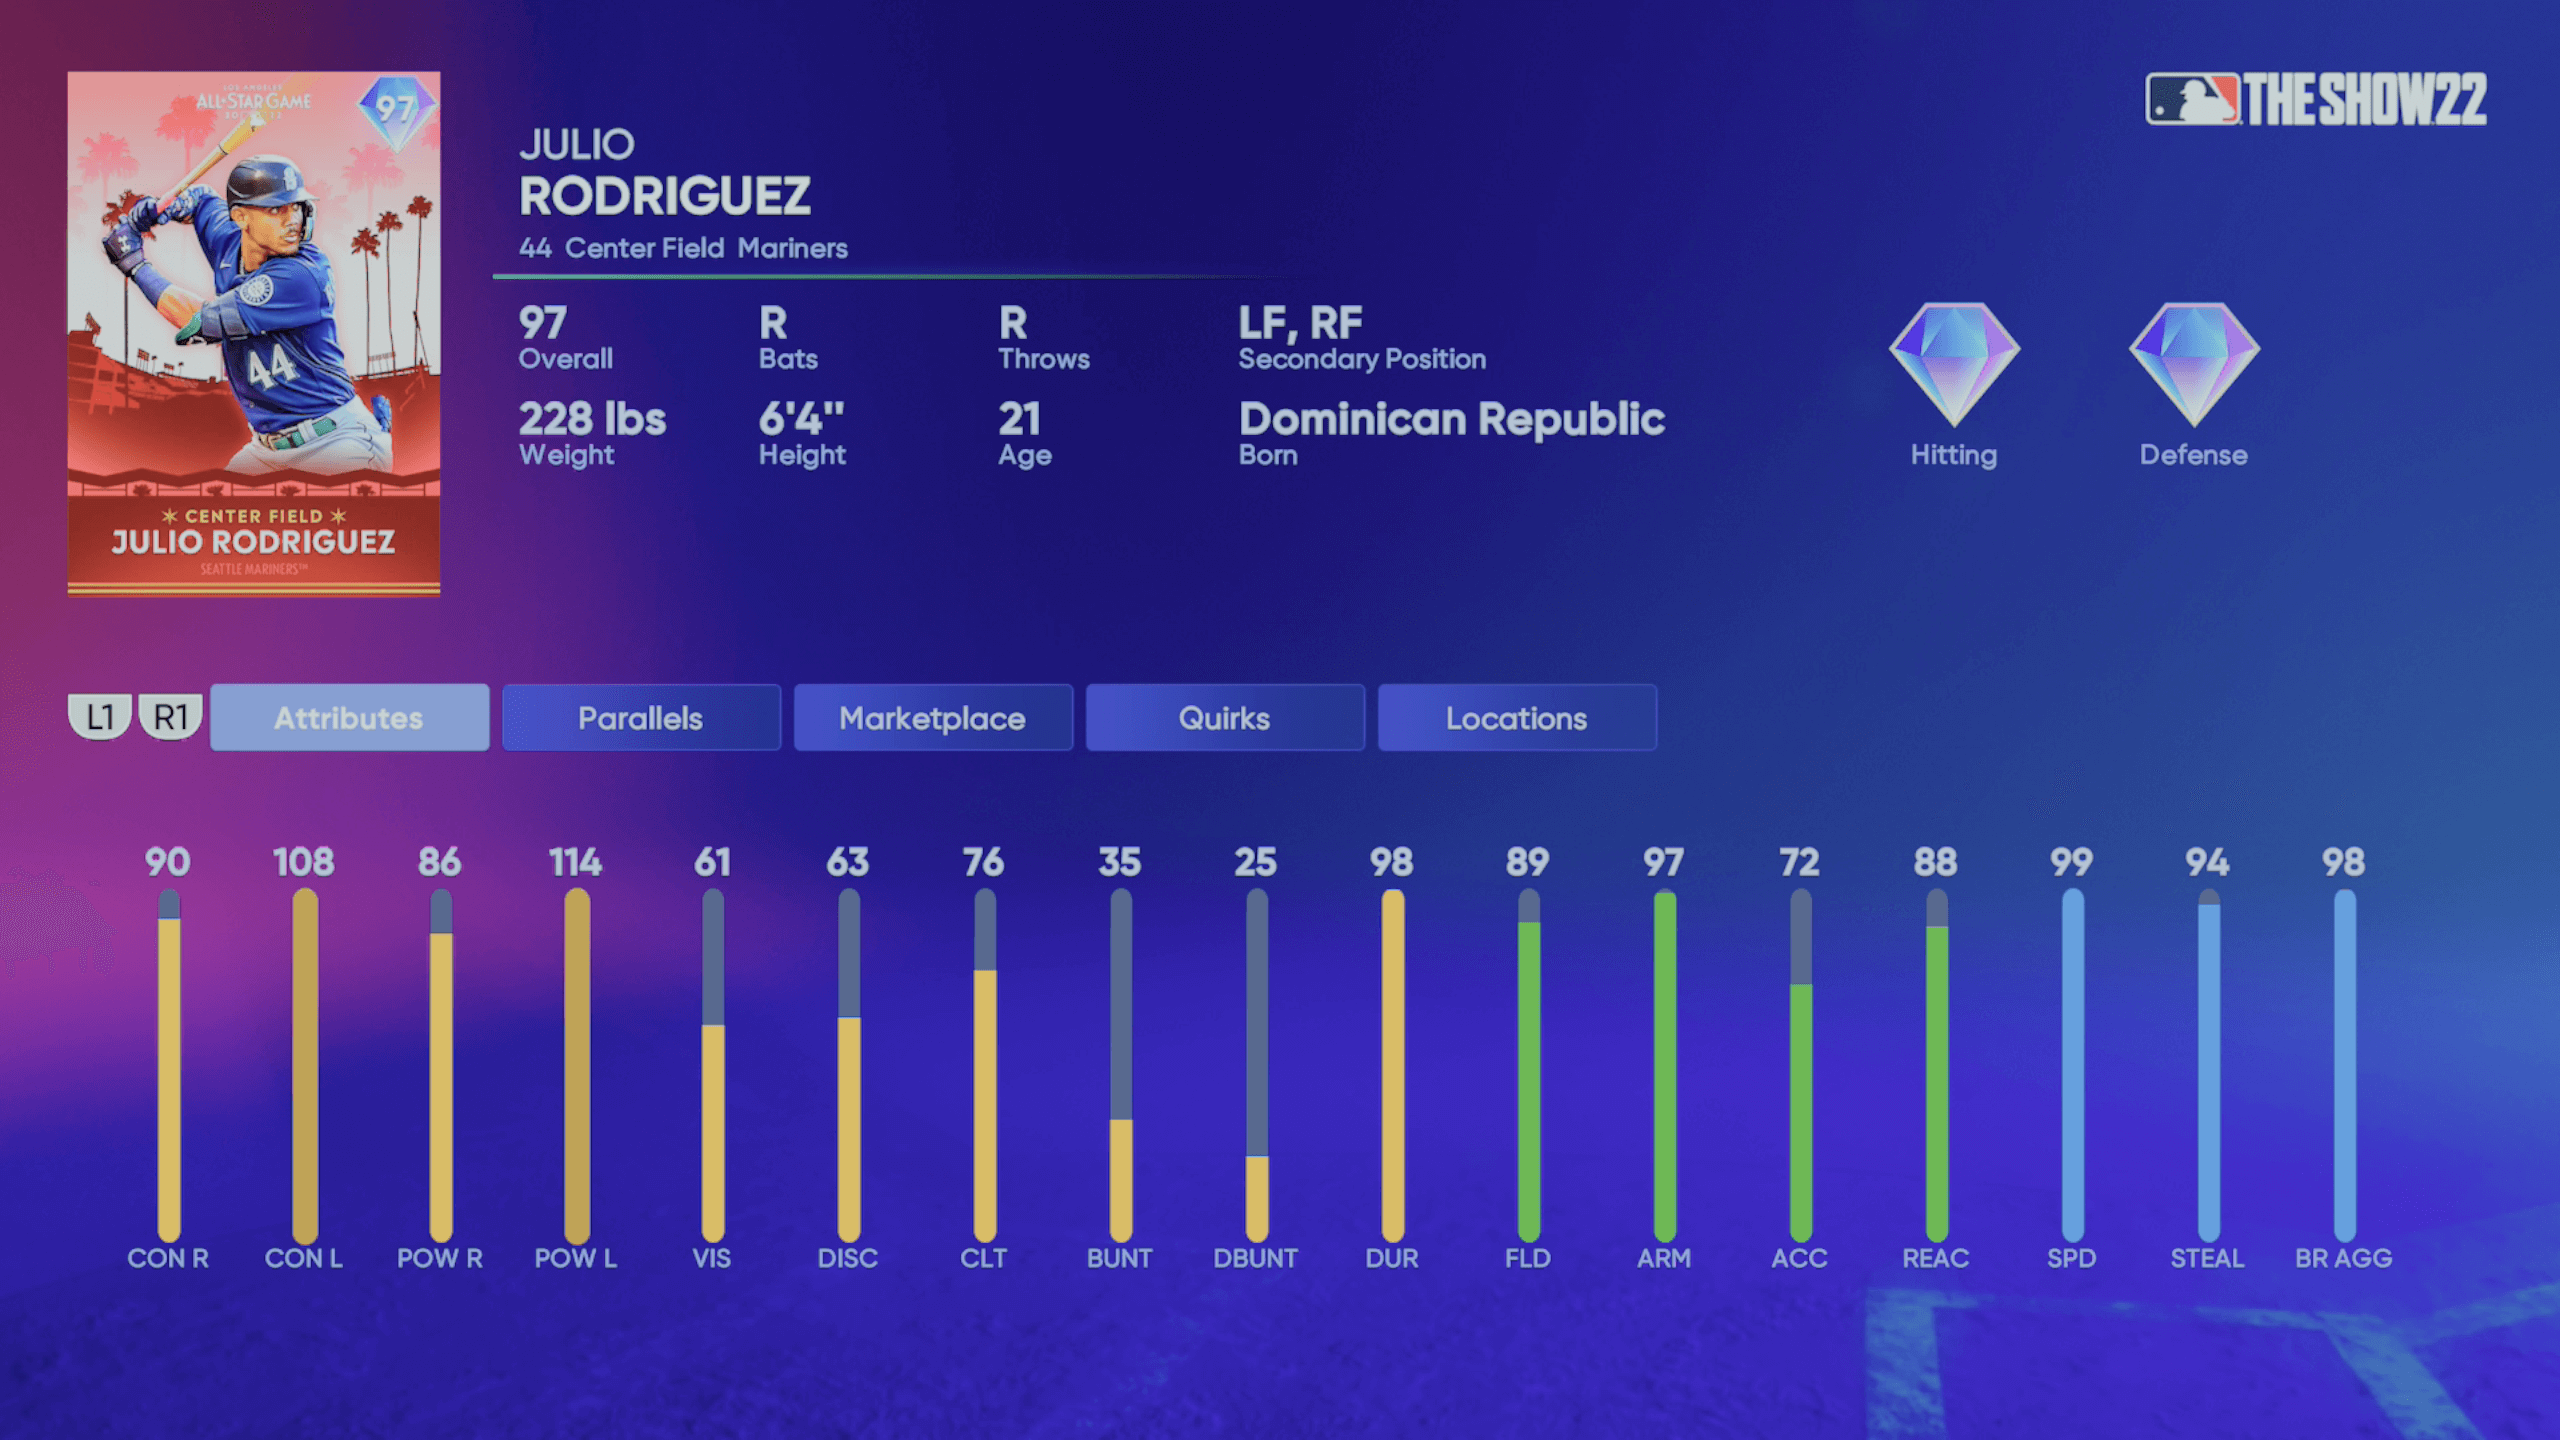 MLB The Show: Benny the Jet Rodriguez - Hollywood Franchise 